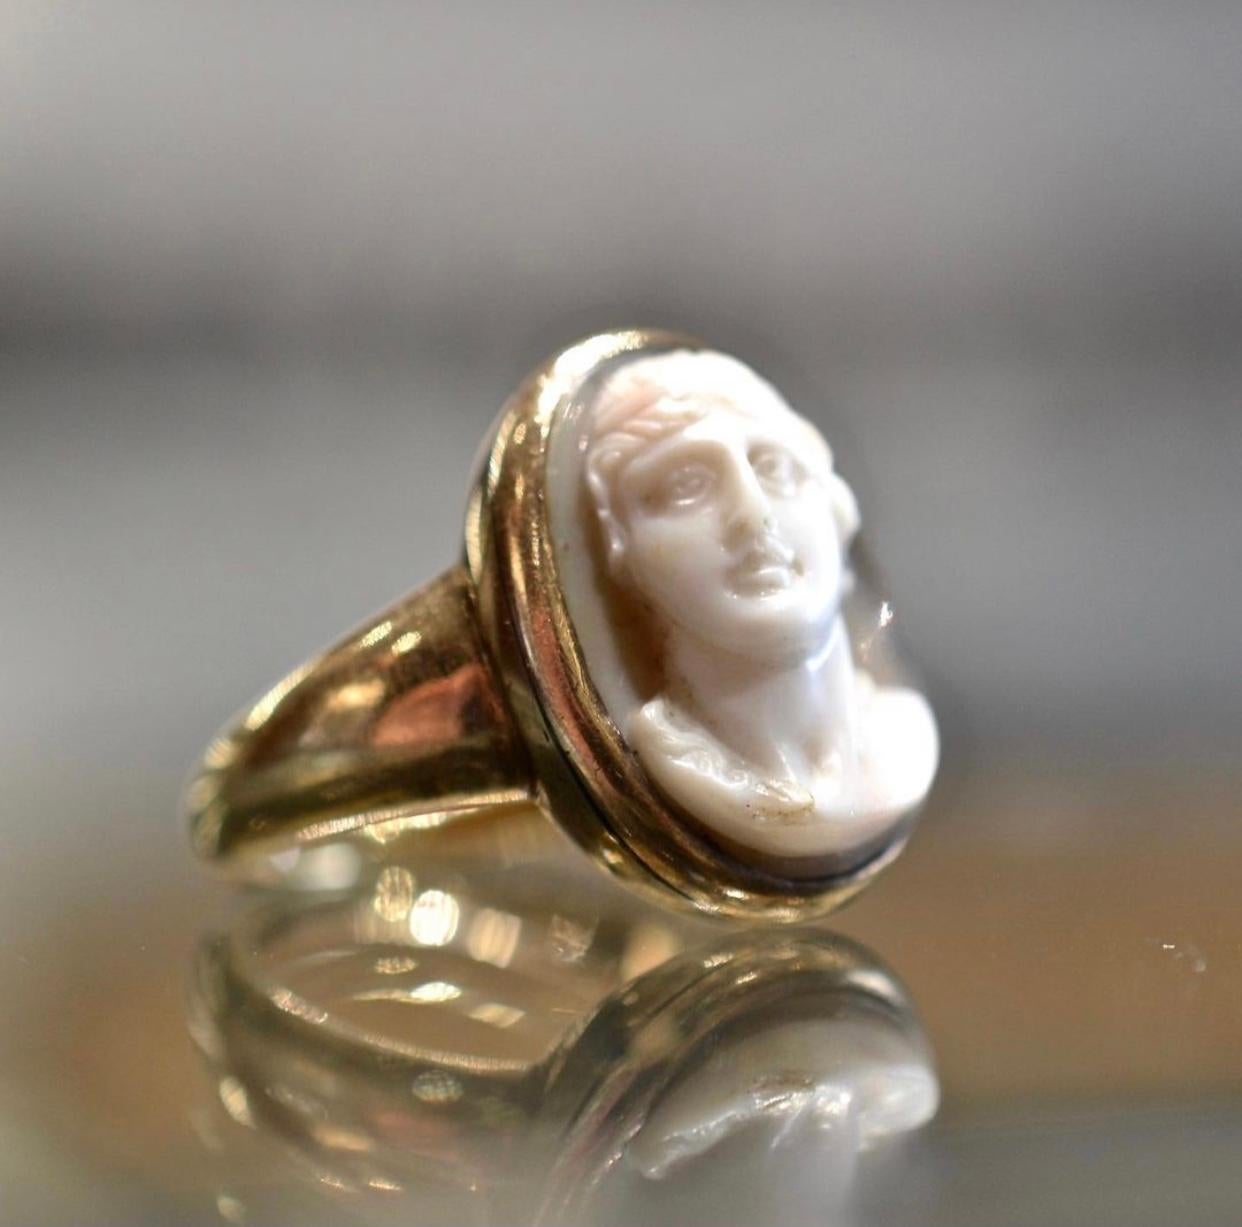 Uncut Renaissance Cameo Ring of a Man in Profile